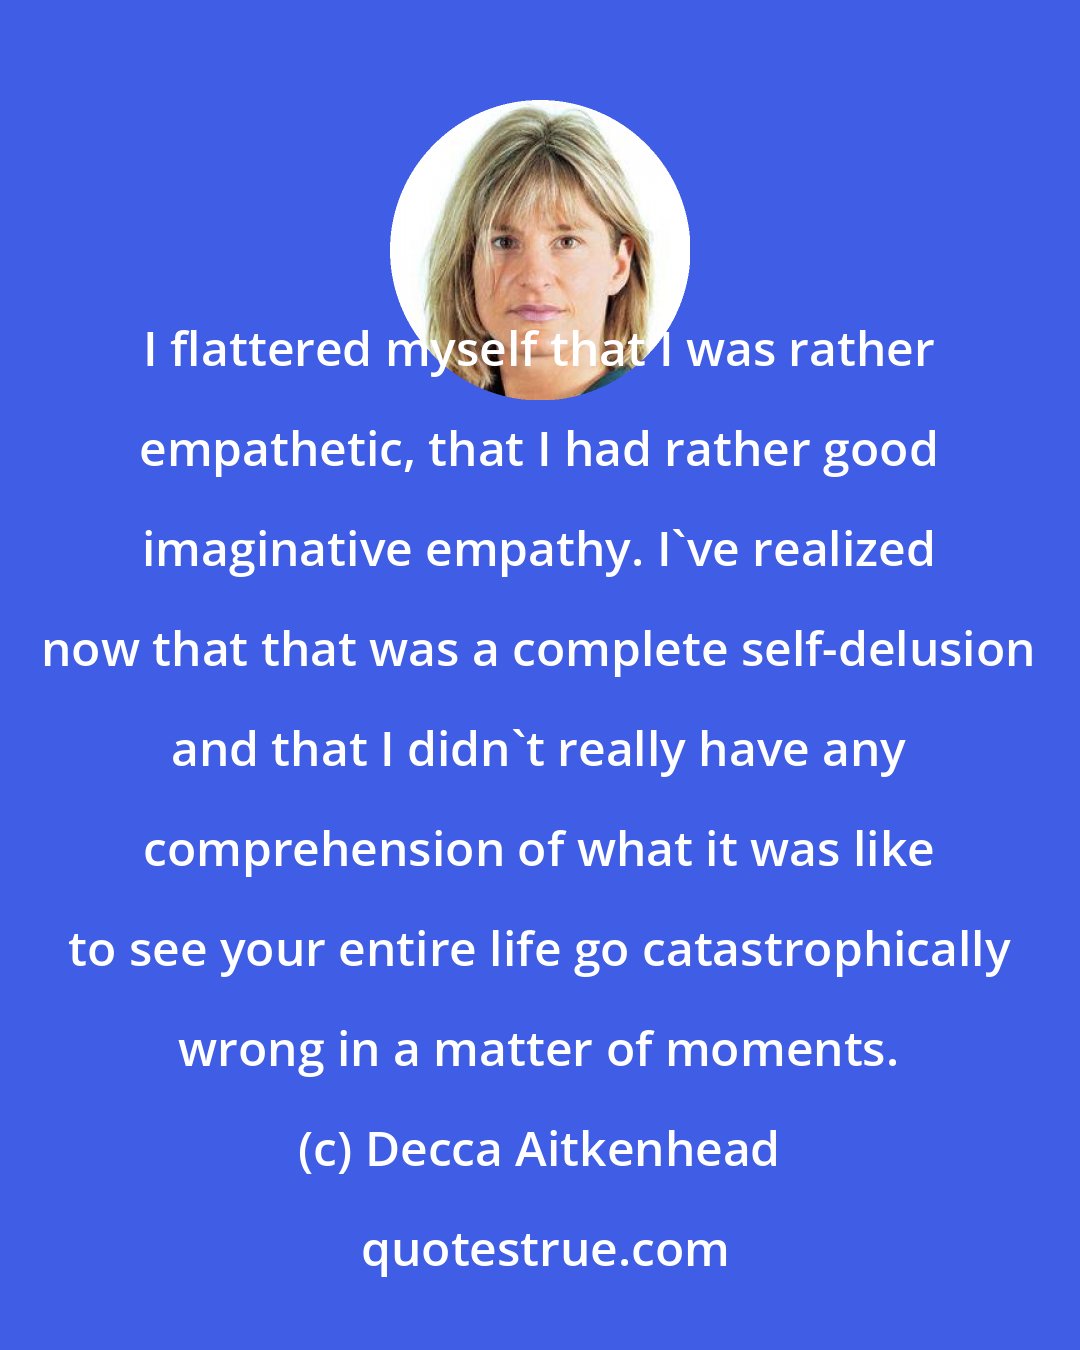 Decca Aitkenhead: I flattered myself that I was rather empathetic, that I had rather good imaginative empathy. I've realized now that that was a complete self-delusion and that I didn't really have any comprehension of what it was like to see your entire life go catastrophically wrong in a matter of moments.